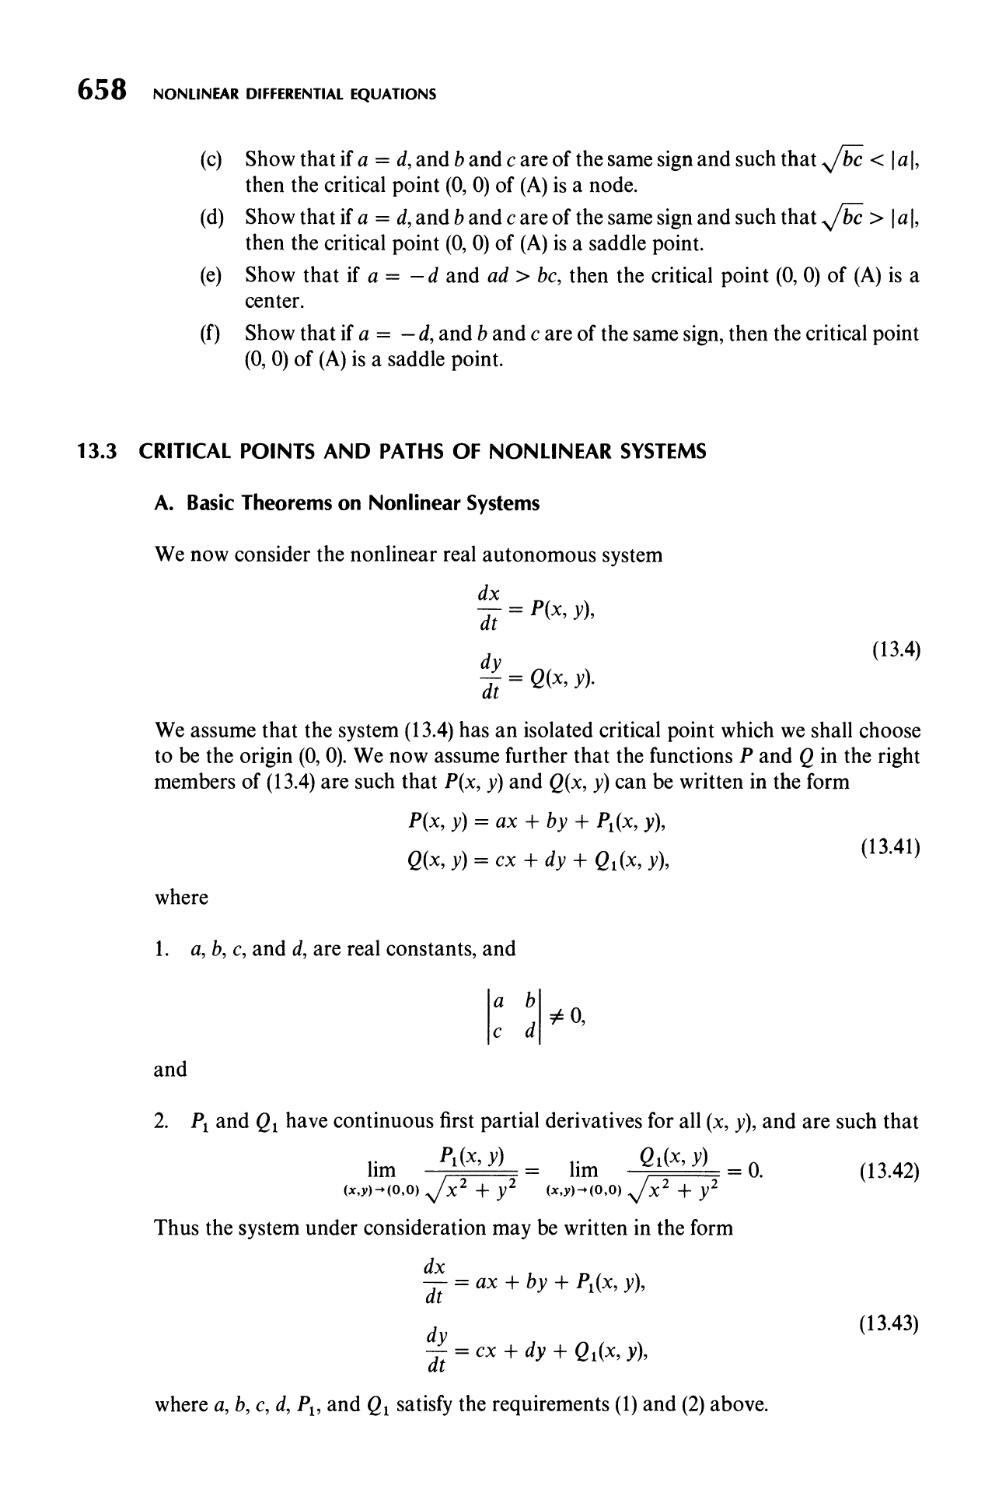 13.3  Critical Points and Paths of Nonlinear Systems